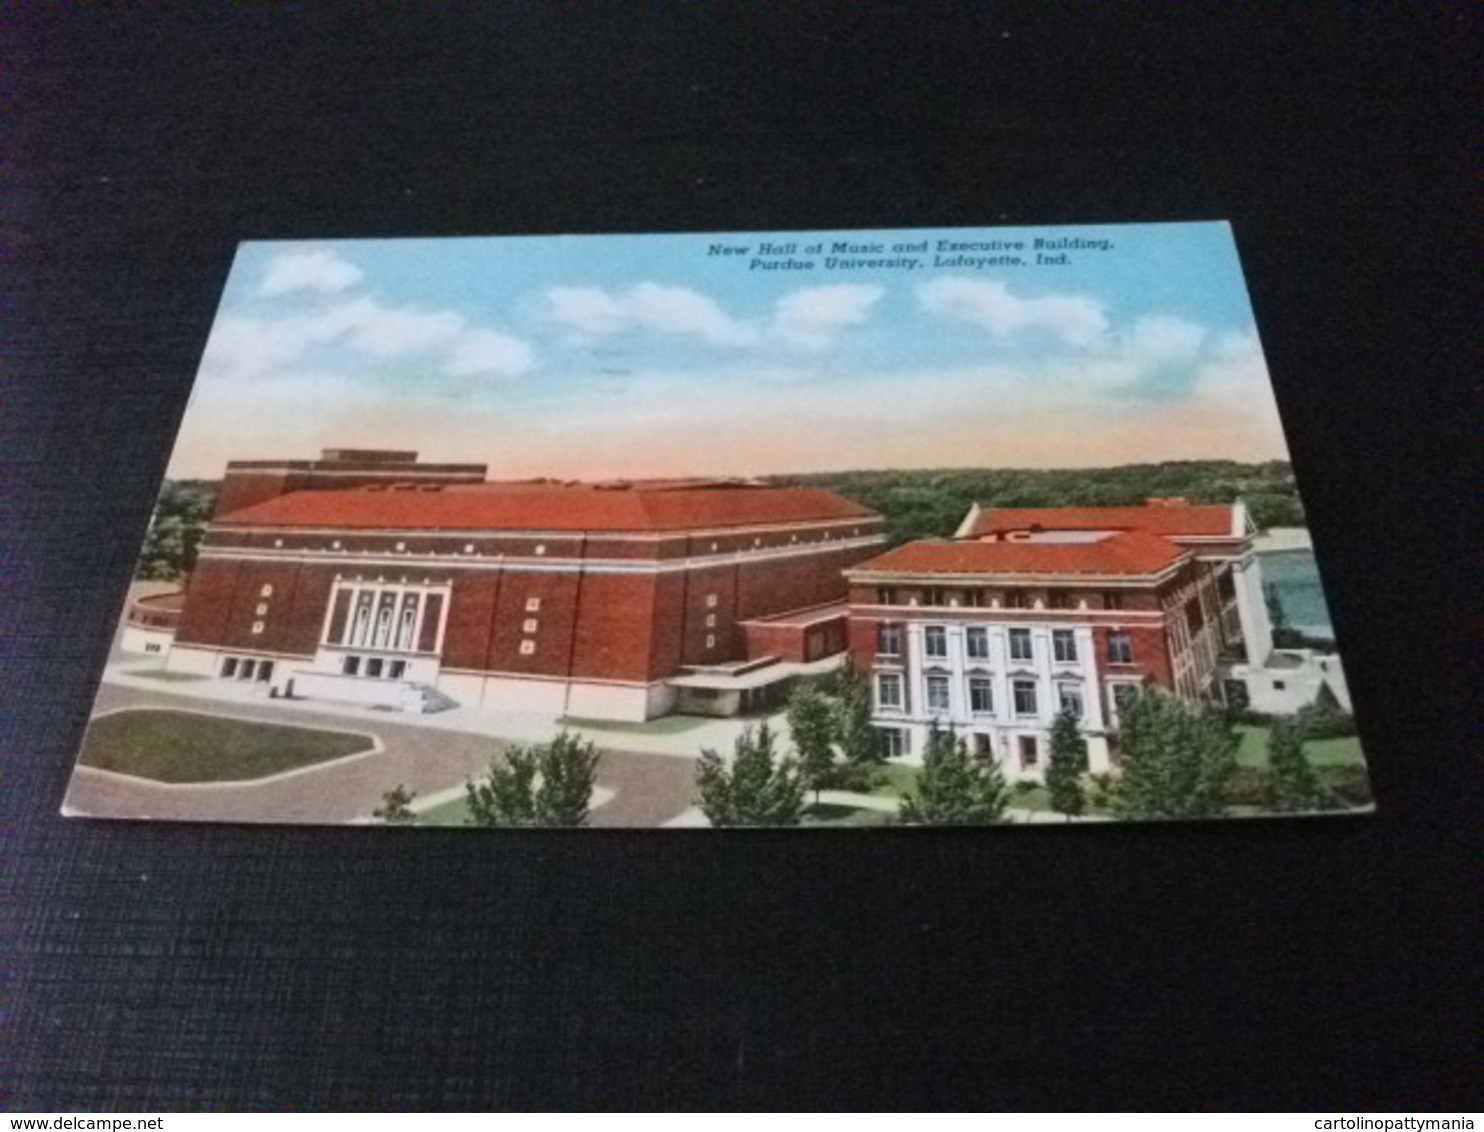 PURDUE UNIVERSITY NEW HALL OF MUSIC AND EXECUTIVE BUILDING  LAFAYETTE IND.  U.S.A. - Scuole